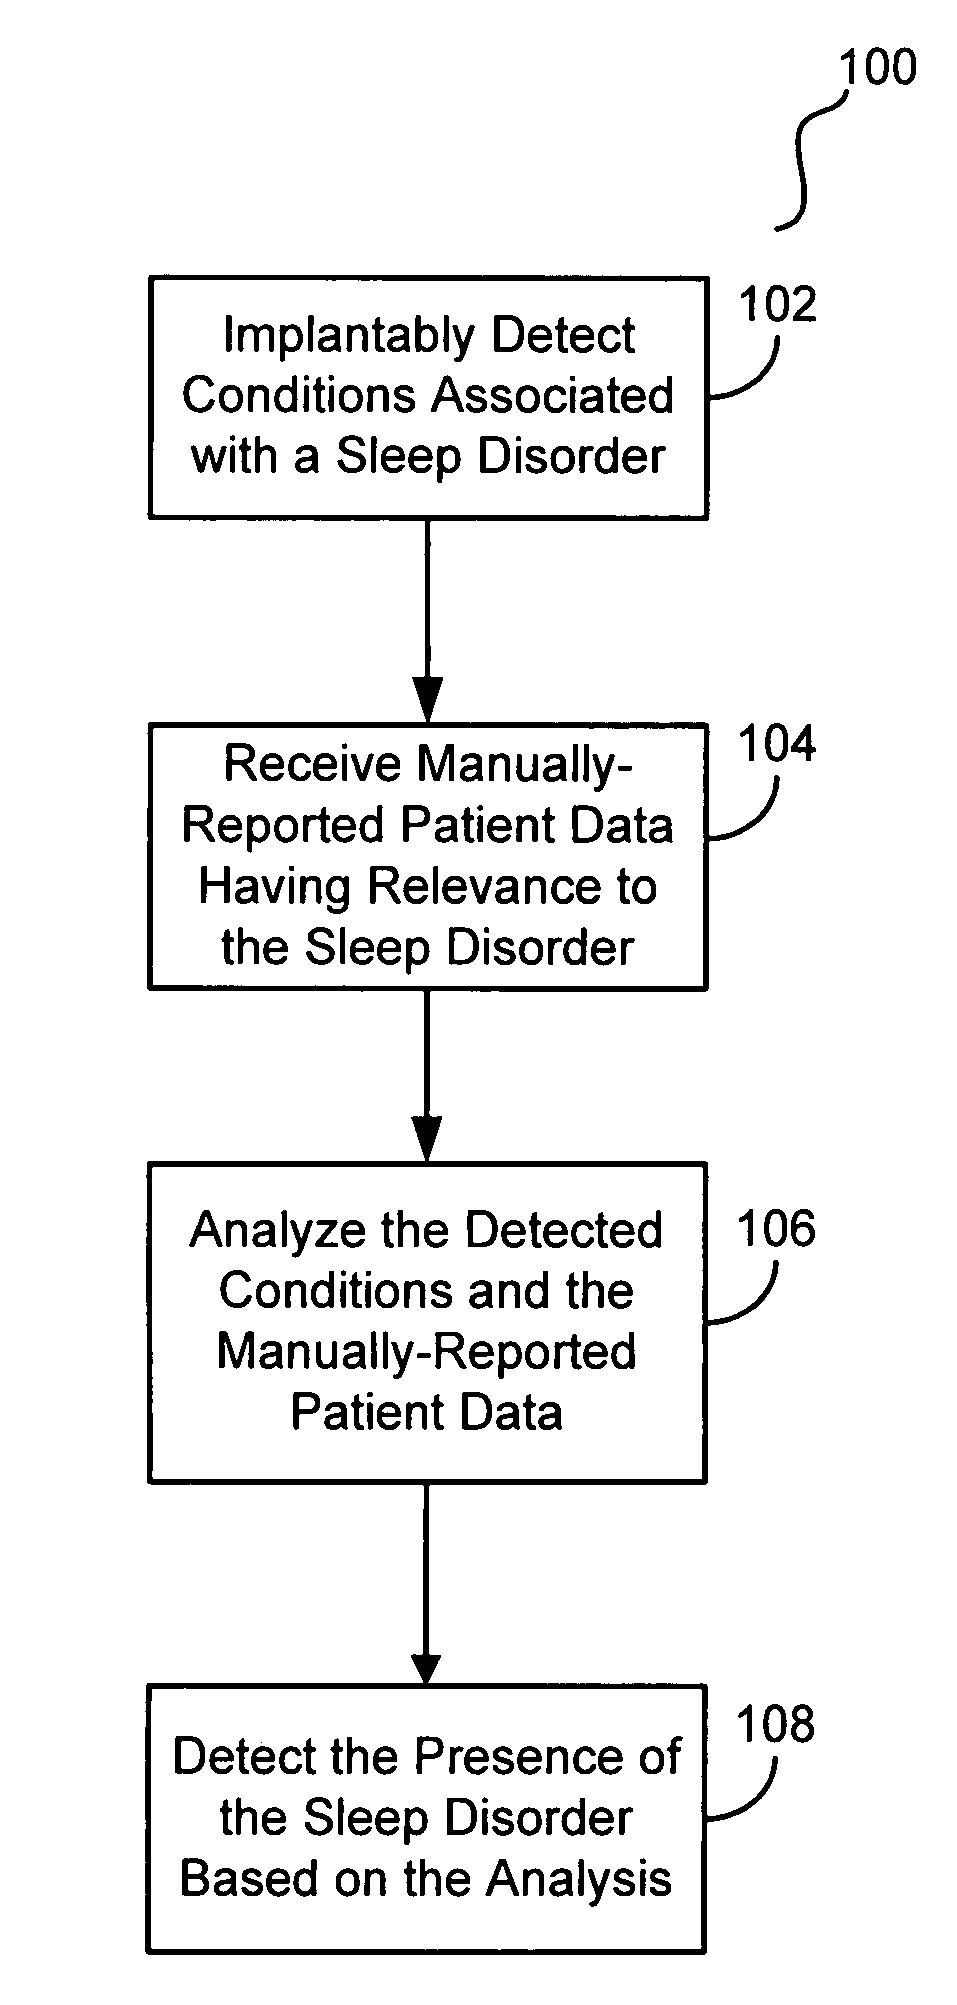 Characterization of sleep disorders using composite patient data